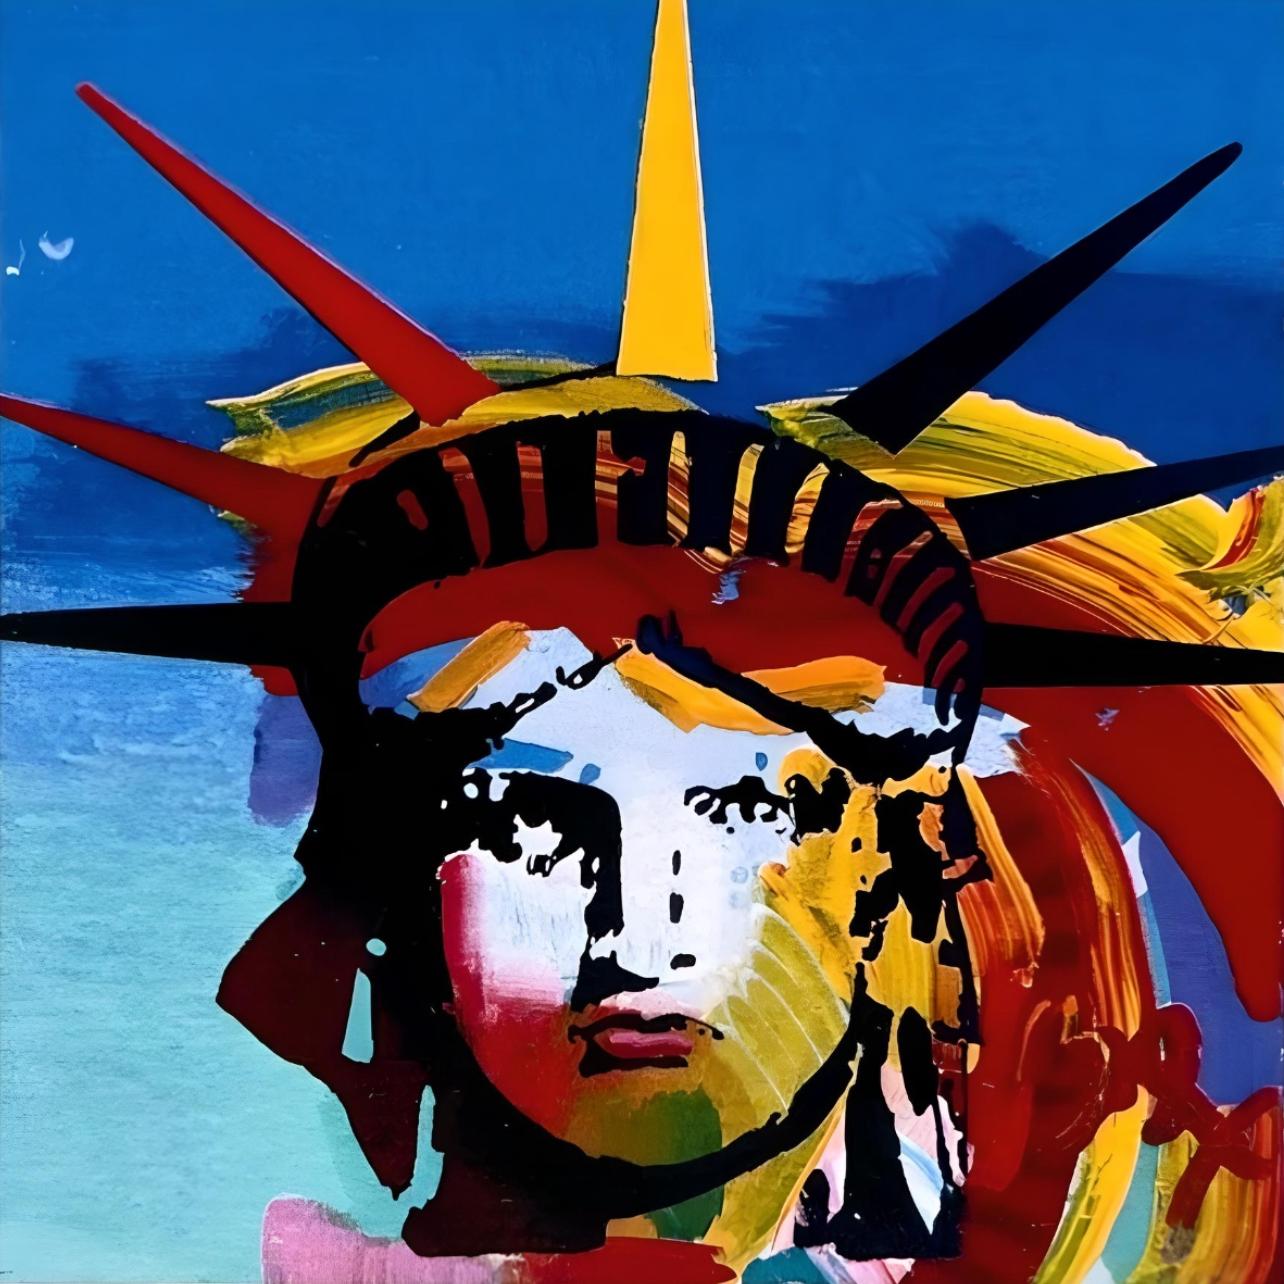 Artist: Peter Max (1937)
Title: Liberty Head III
Year: 2001
Edition: 485/500, plus proofs
Medium: Lithograph on Lustro Saxony paper
Size: 3.5 x 3 inches
Condition: Excellent
Inscription: Signed and numbered by the artist.
Notes: Published by Via